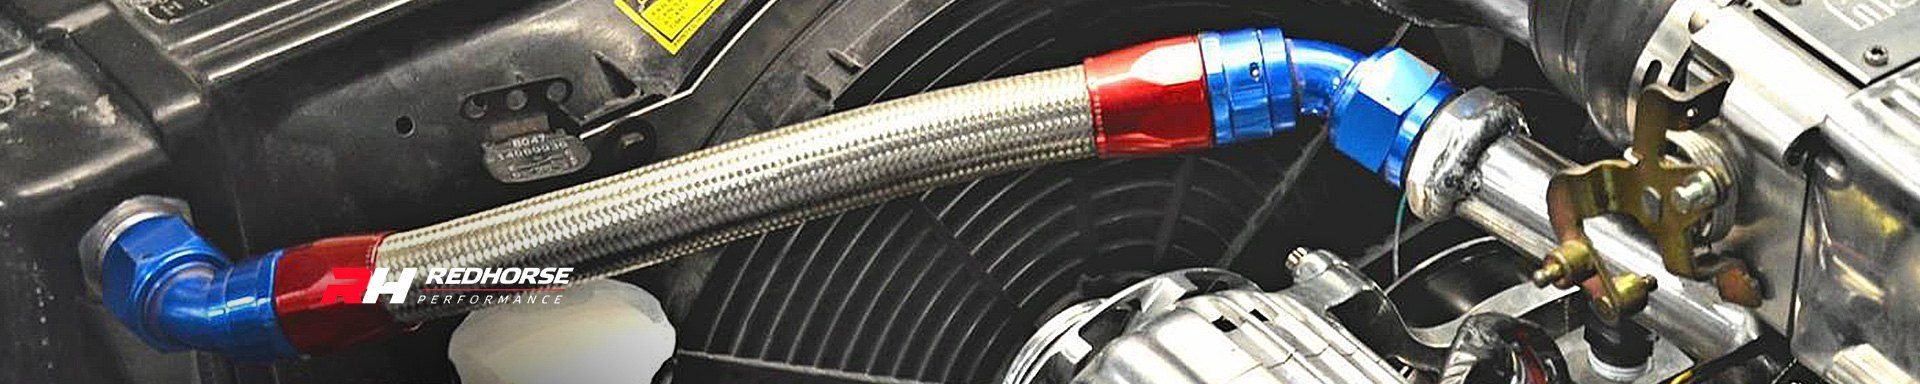 Redhorse Performance Fittings, Lines & Hoses